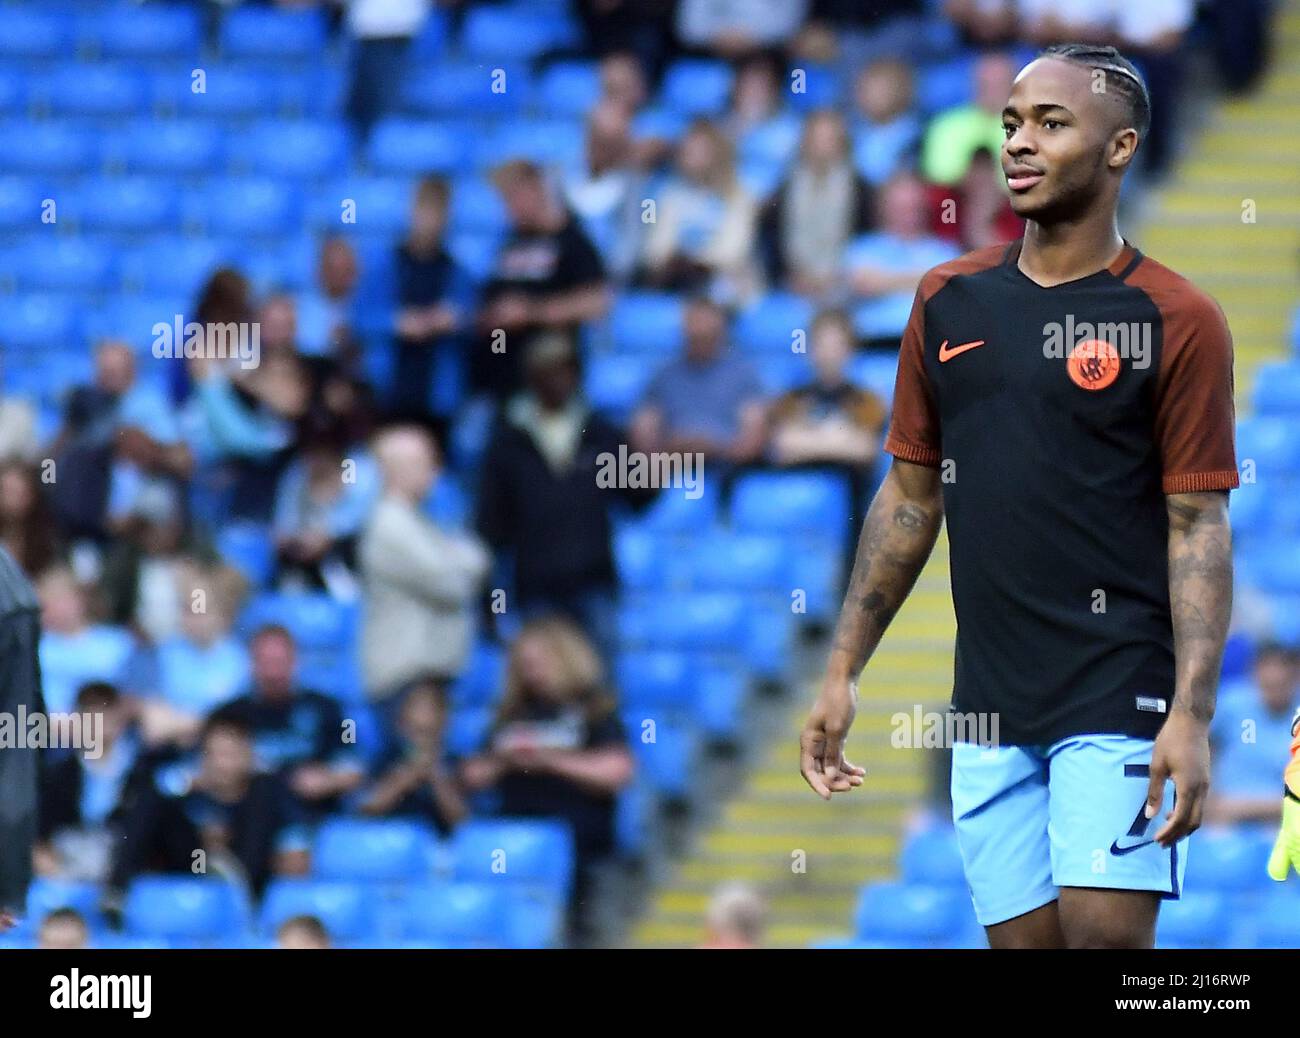 MANCHESTER, ENGLAND - AUGUST 24, 2016: Raheem Sterling of City pictured prior to the second leg of the 2016/17 UEFA Champions League tie between Manchester City (Engalnd) and FCSB (Romania) at Etihad Stadium. Copyright: Cosmin Iftode/Picstaff Stock Photo